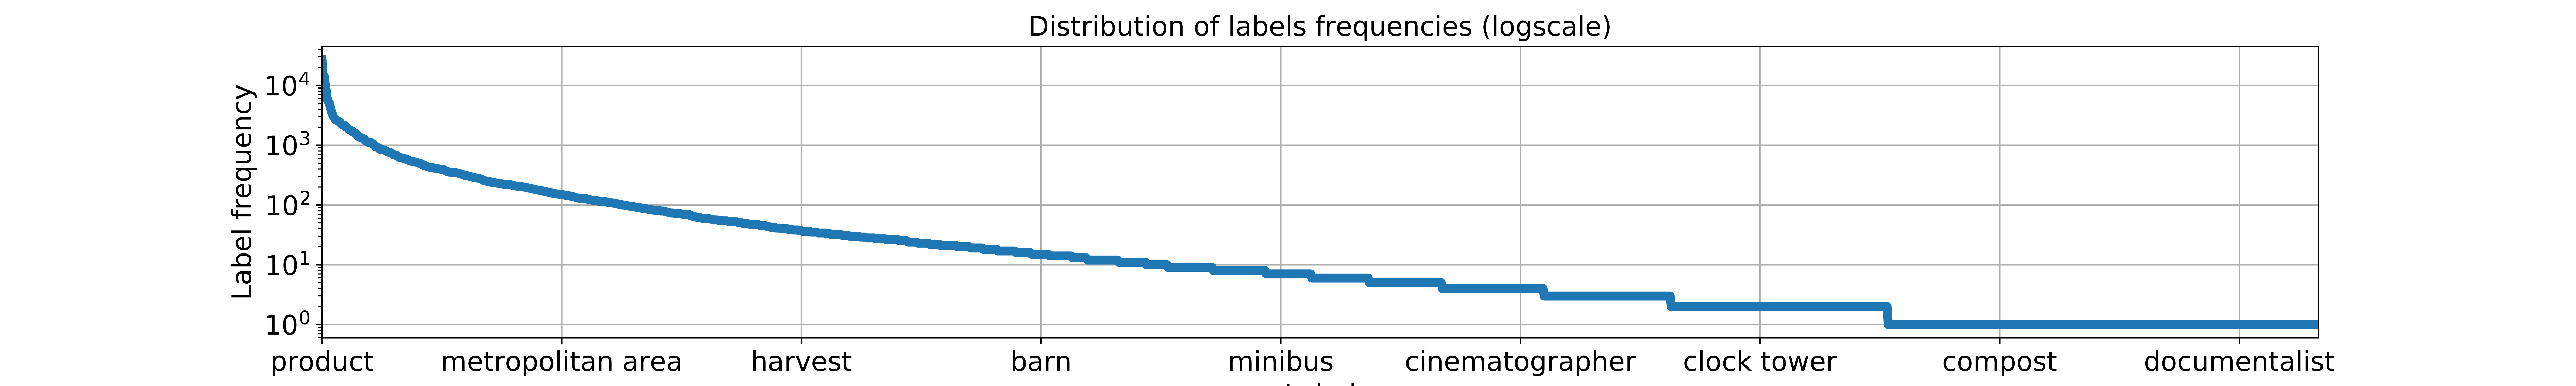 Distribution of labels frequencies. 